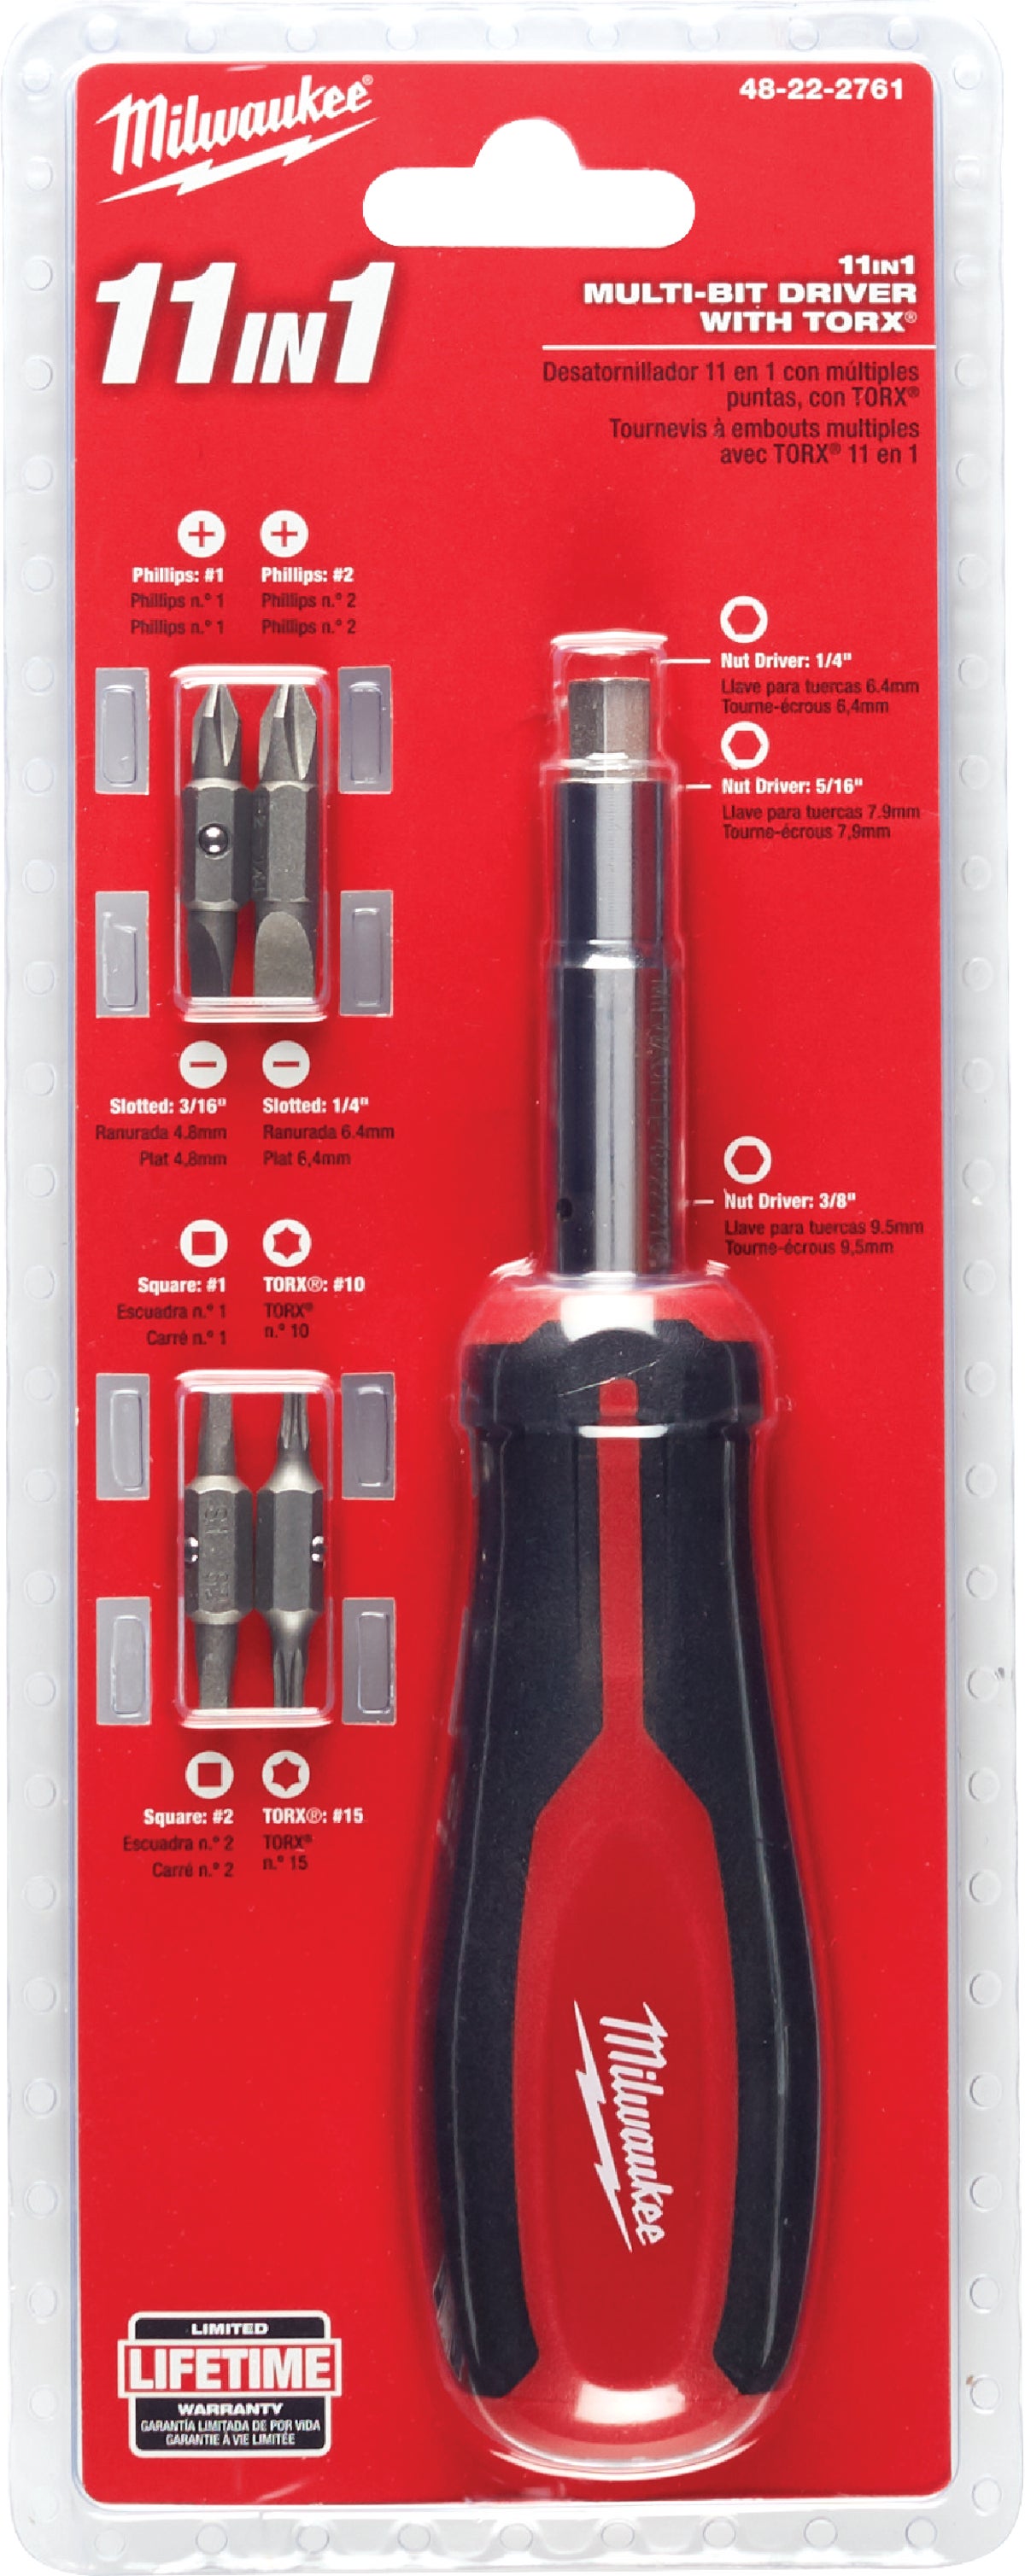 Milwaukee 48-22-2110 Replacement Bits for 11 in 1 Screwdriver 